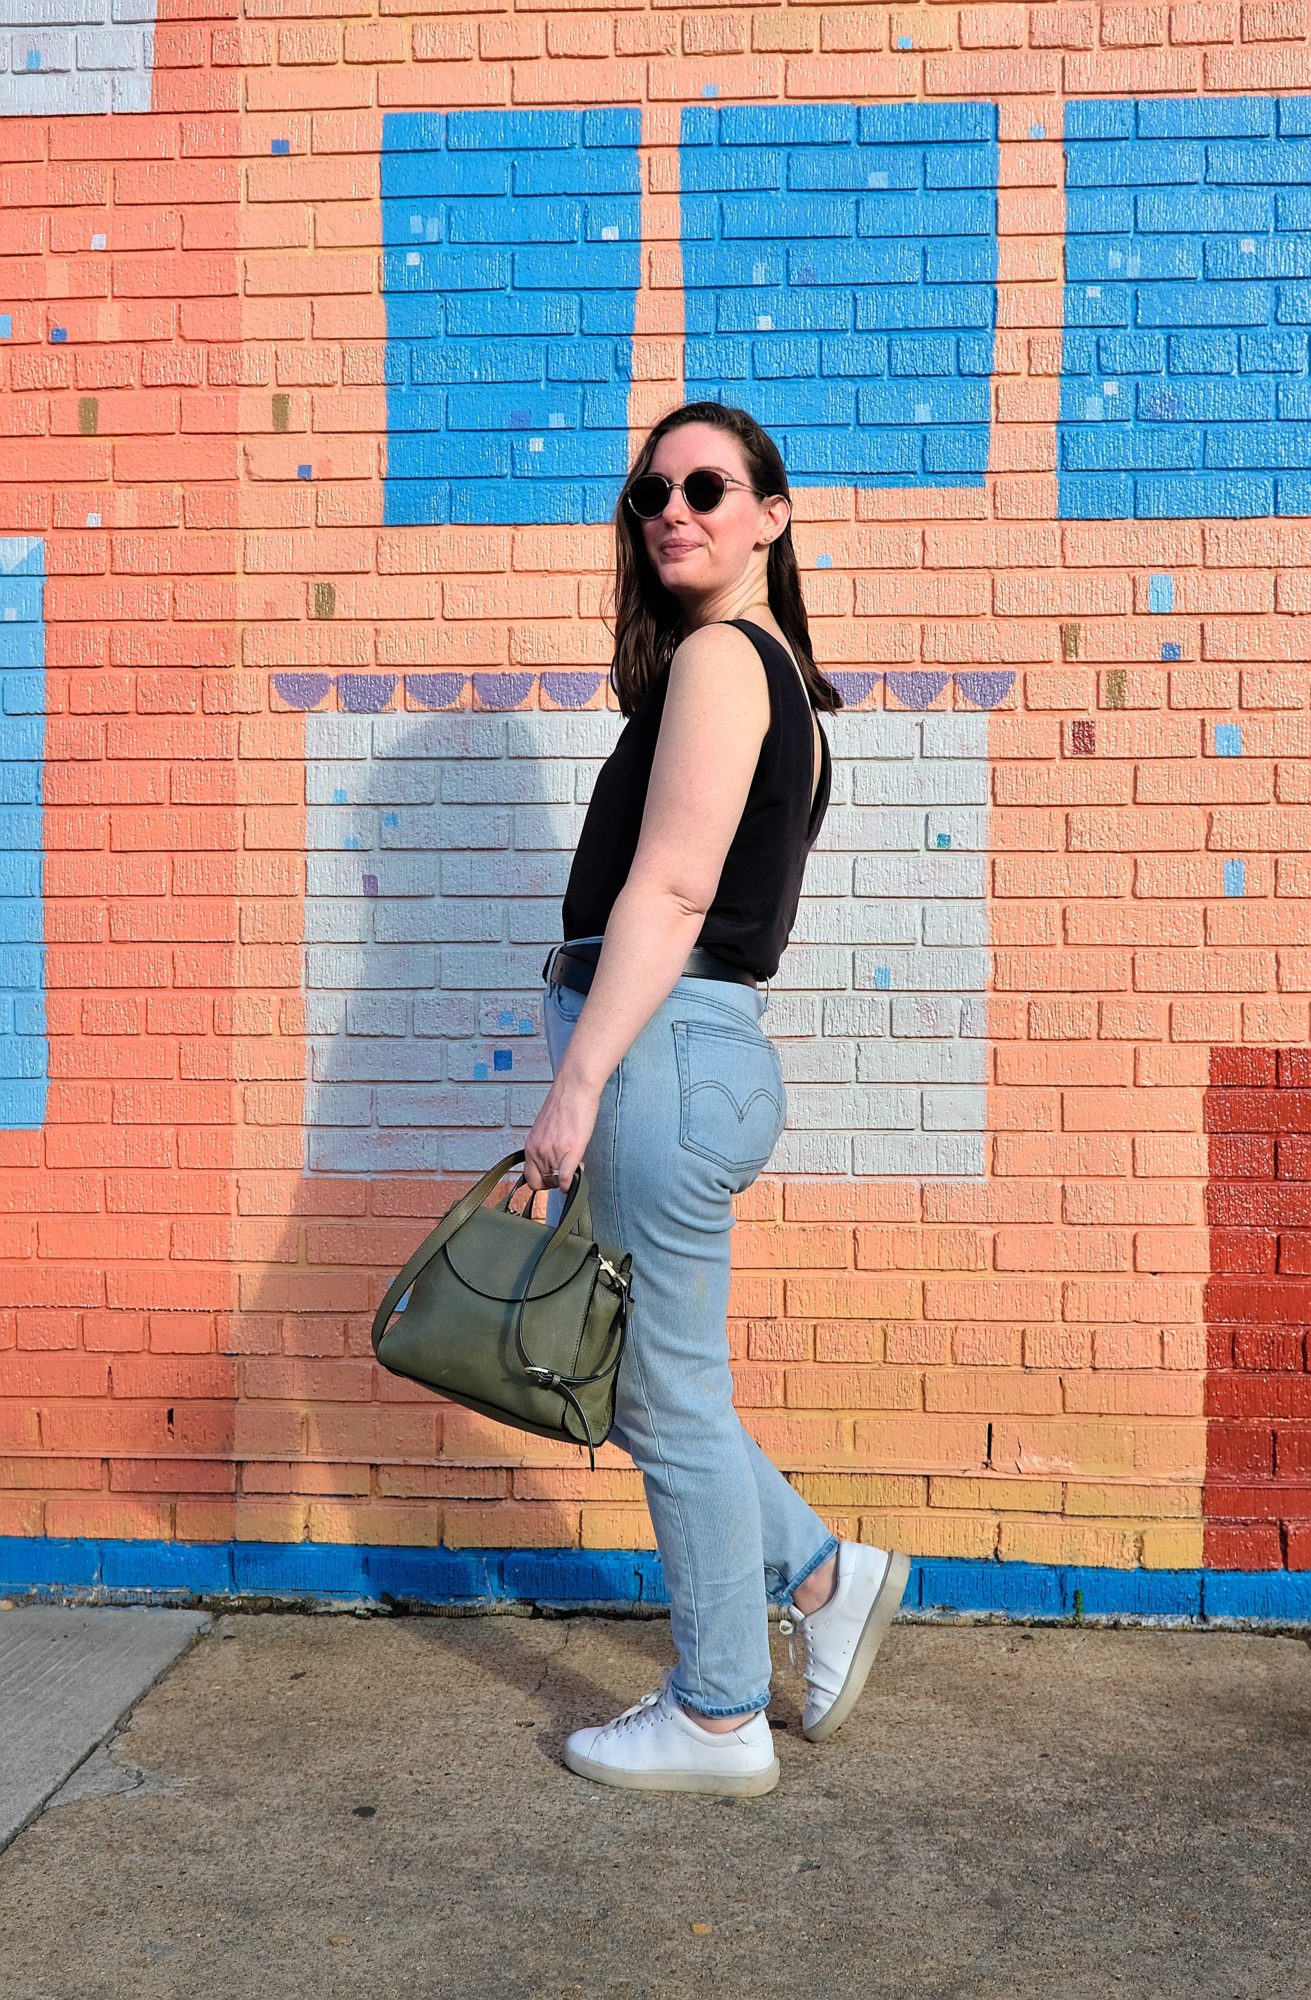 Alyssa walks in front of a colorful mural in Richmond's Carytown neighborhood